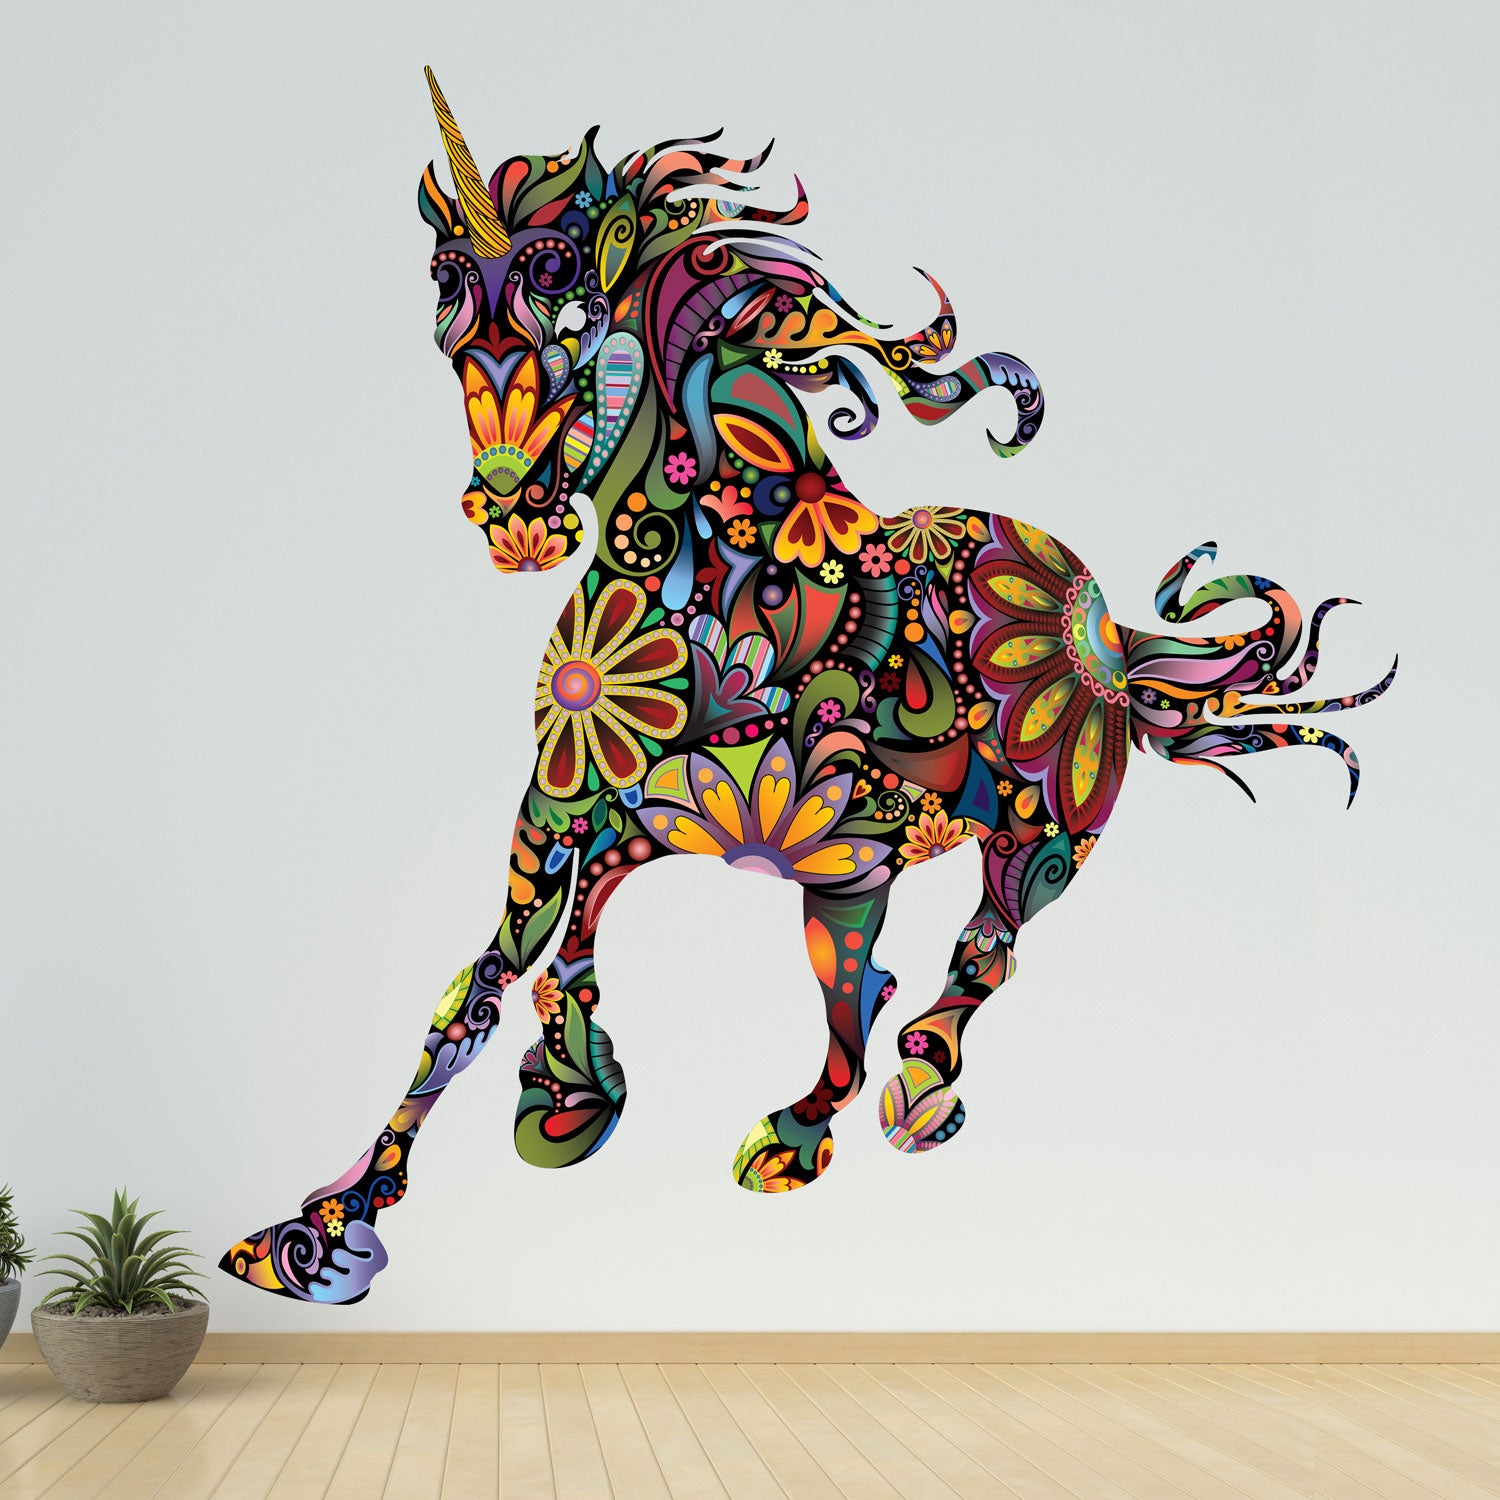 Unicorn Wall Decal, Horse Decal, Star Decals, Eco-Friendly Fabric Wall